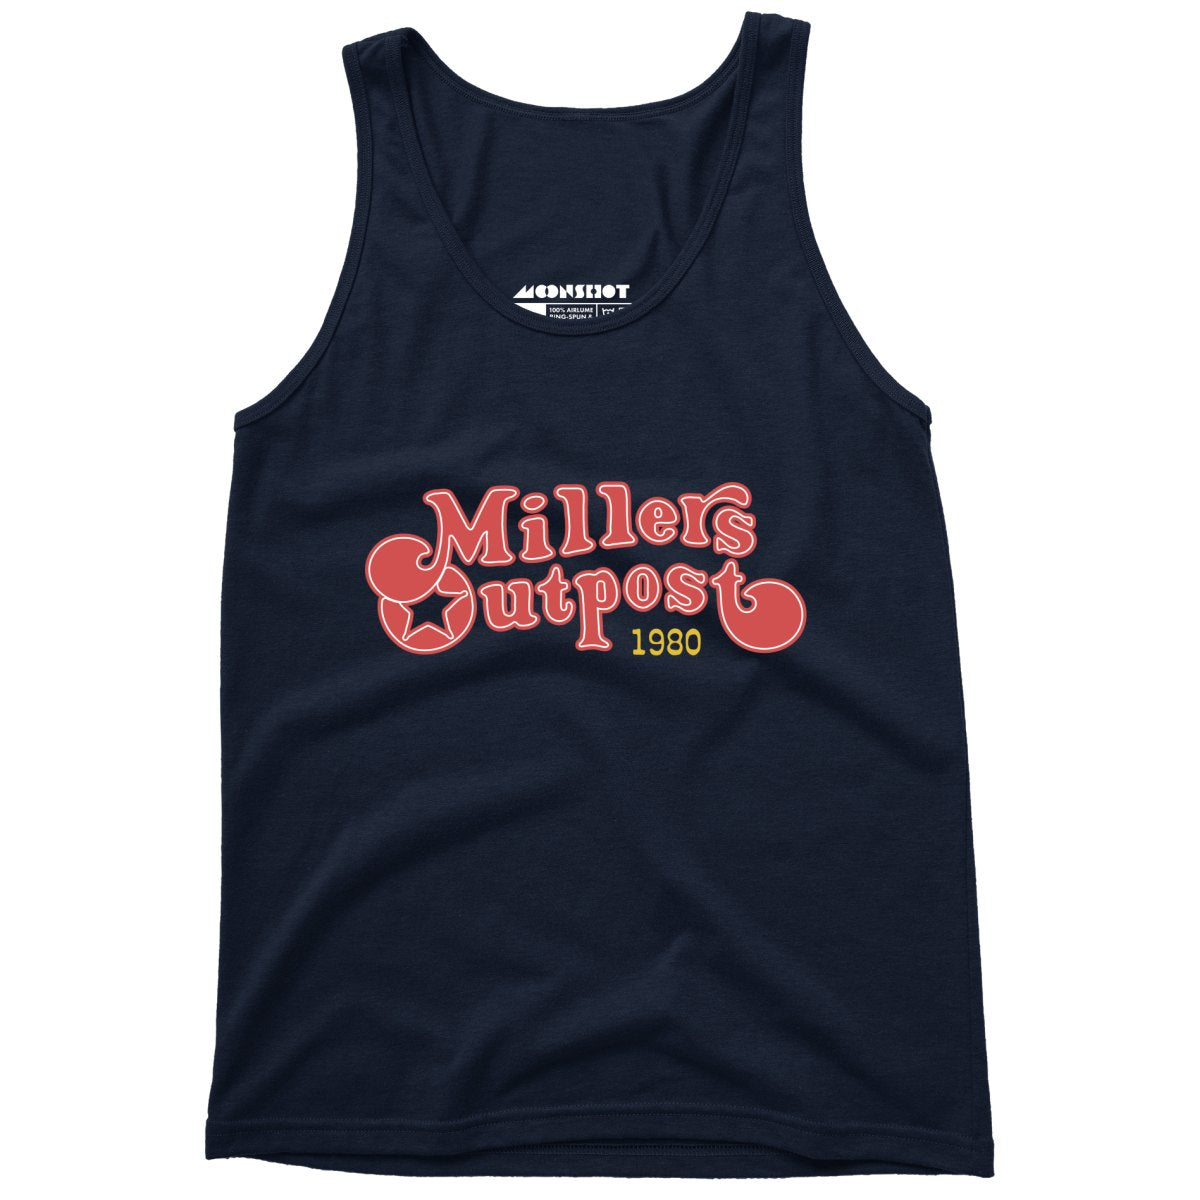 Millers Outpost - Unisex Tank Top – m00nshot